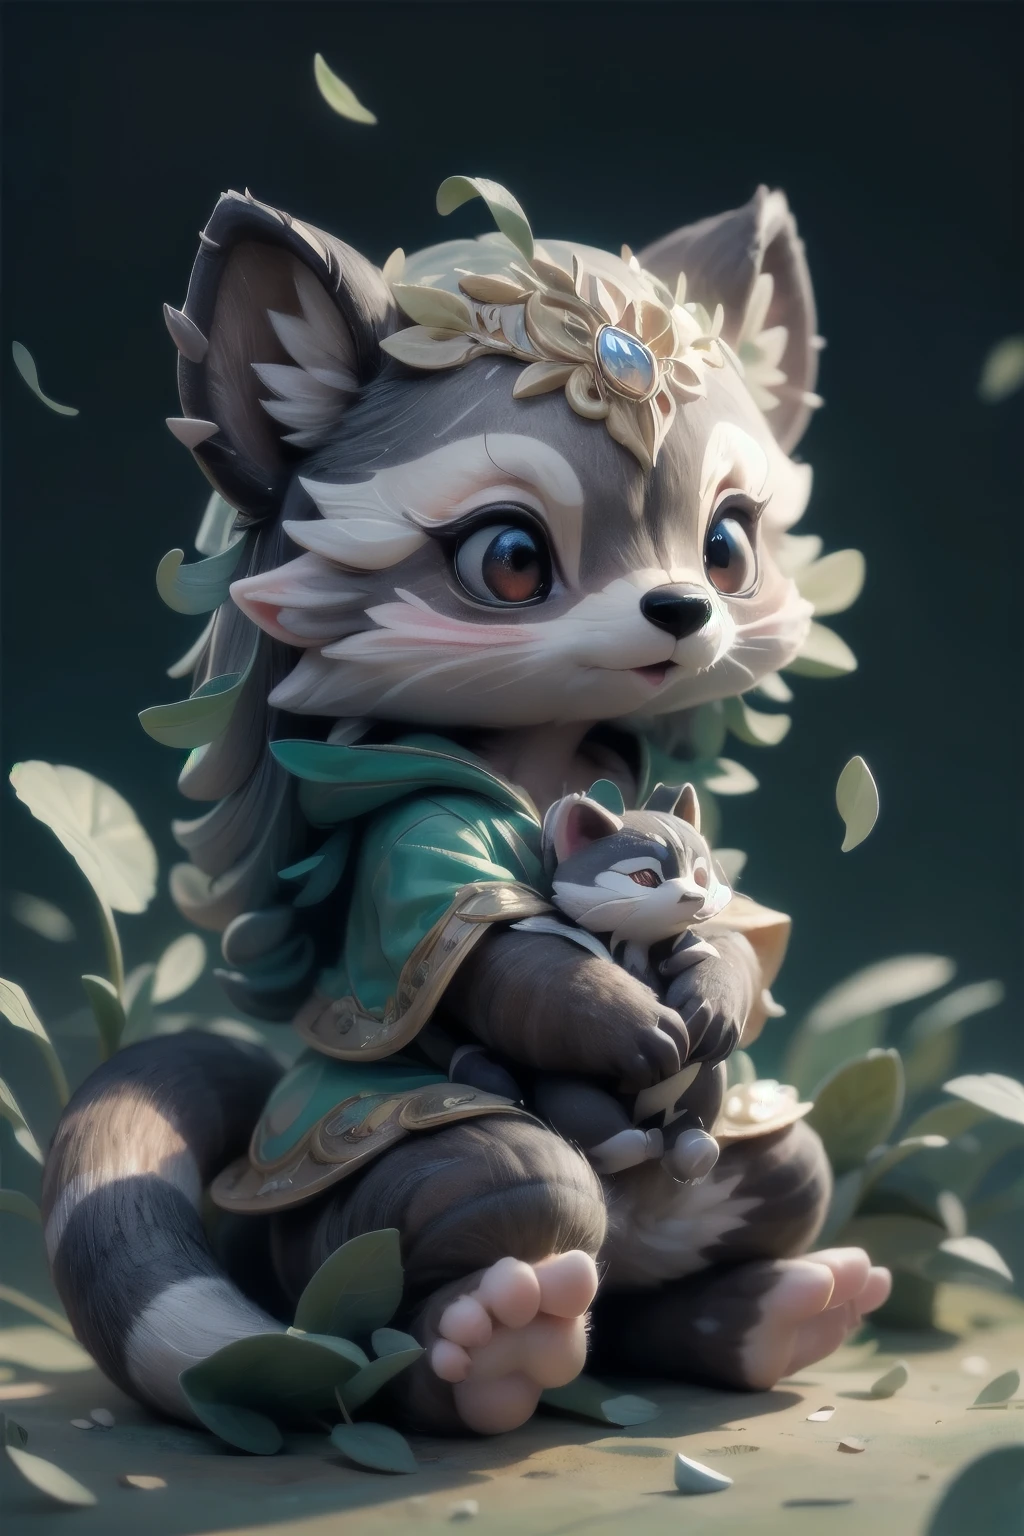 Cute raccoon in a surreal, dreamy fantasy scene、Detailed digital illustration、8K、Very detailed、Very realistic、Photorealistic、Bright colors、Dramatic lighting、Intricate details、Whimsical、magical realism、Soft pastel tones、Shine、Ethereal、Mysterious、Mysterious、Imaginative、Conceptual